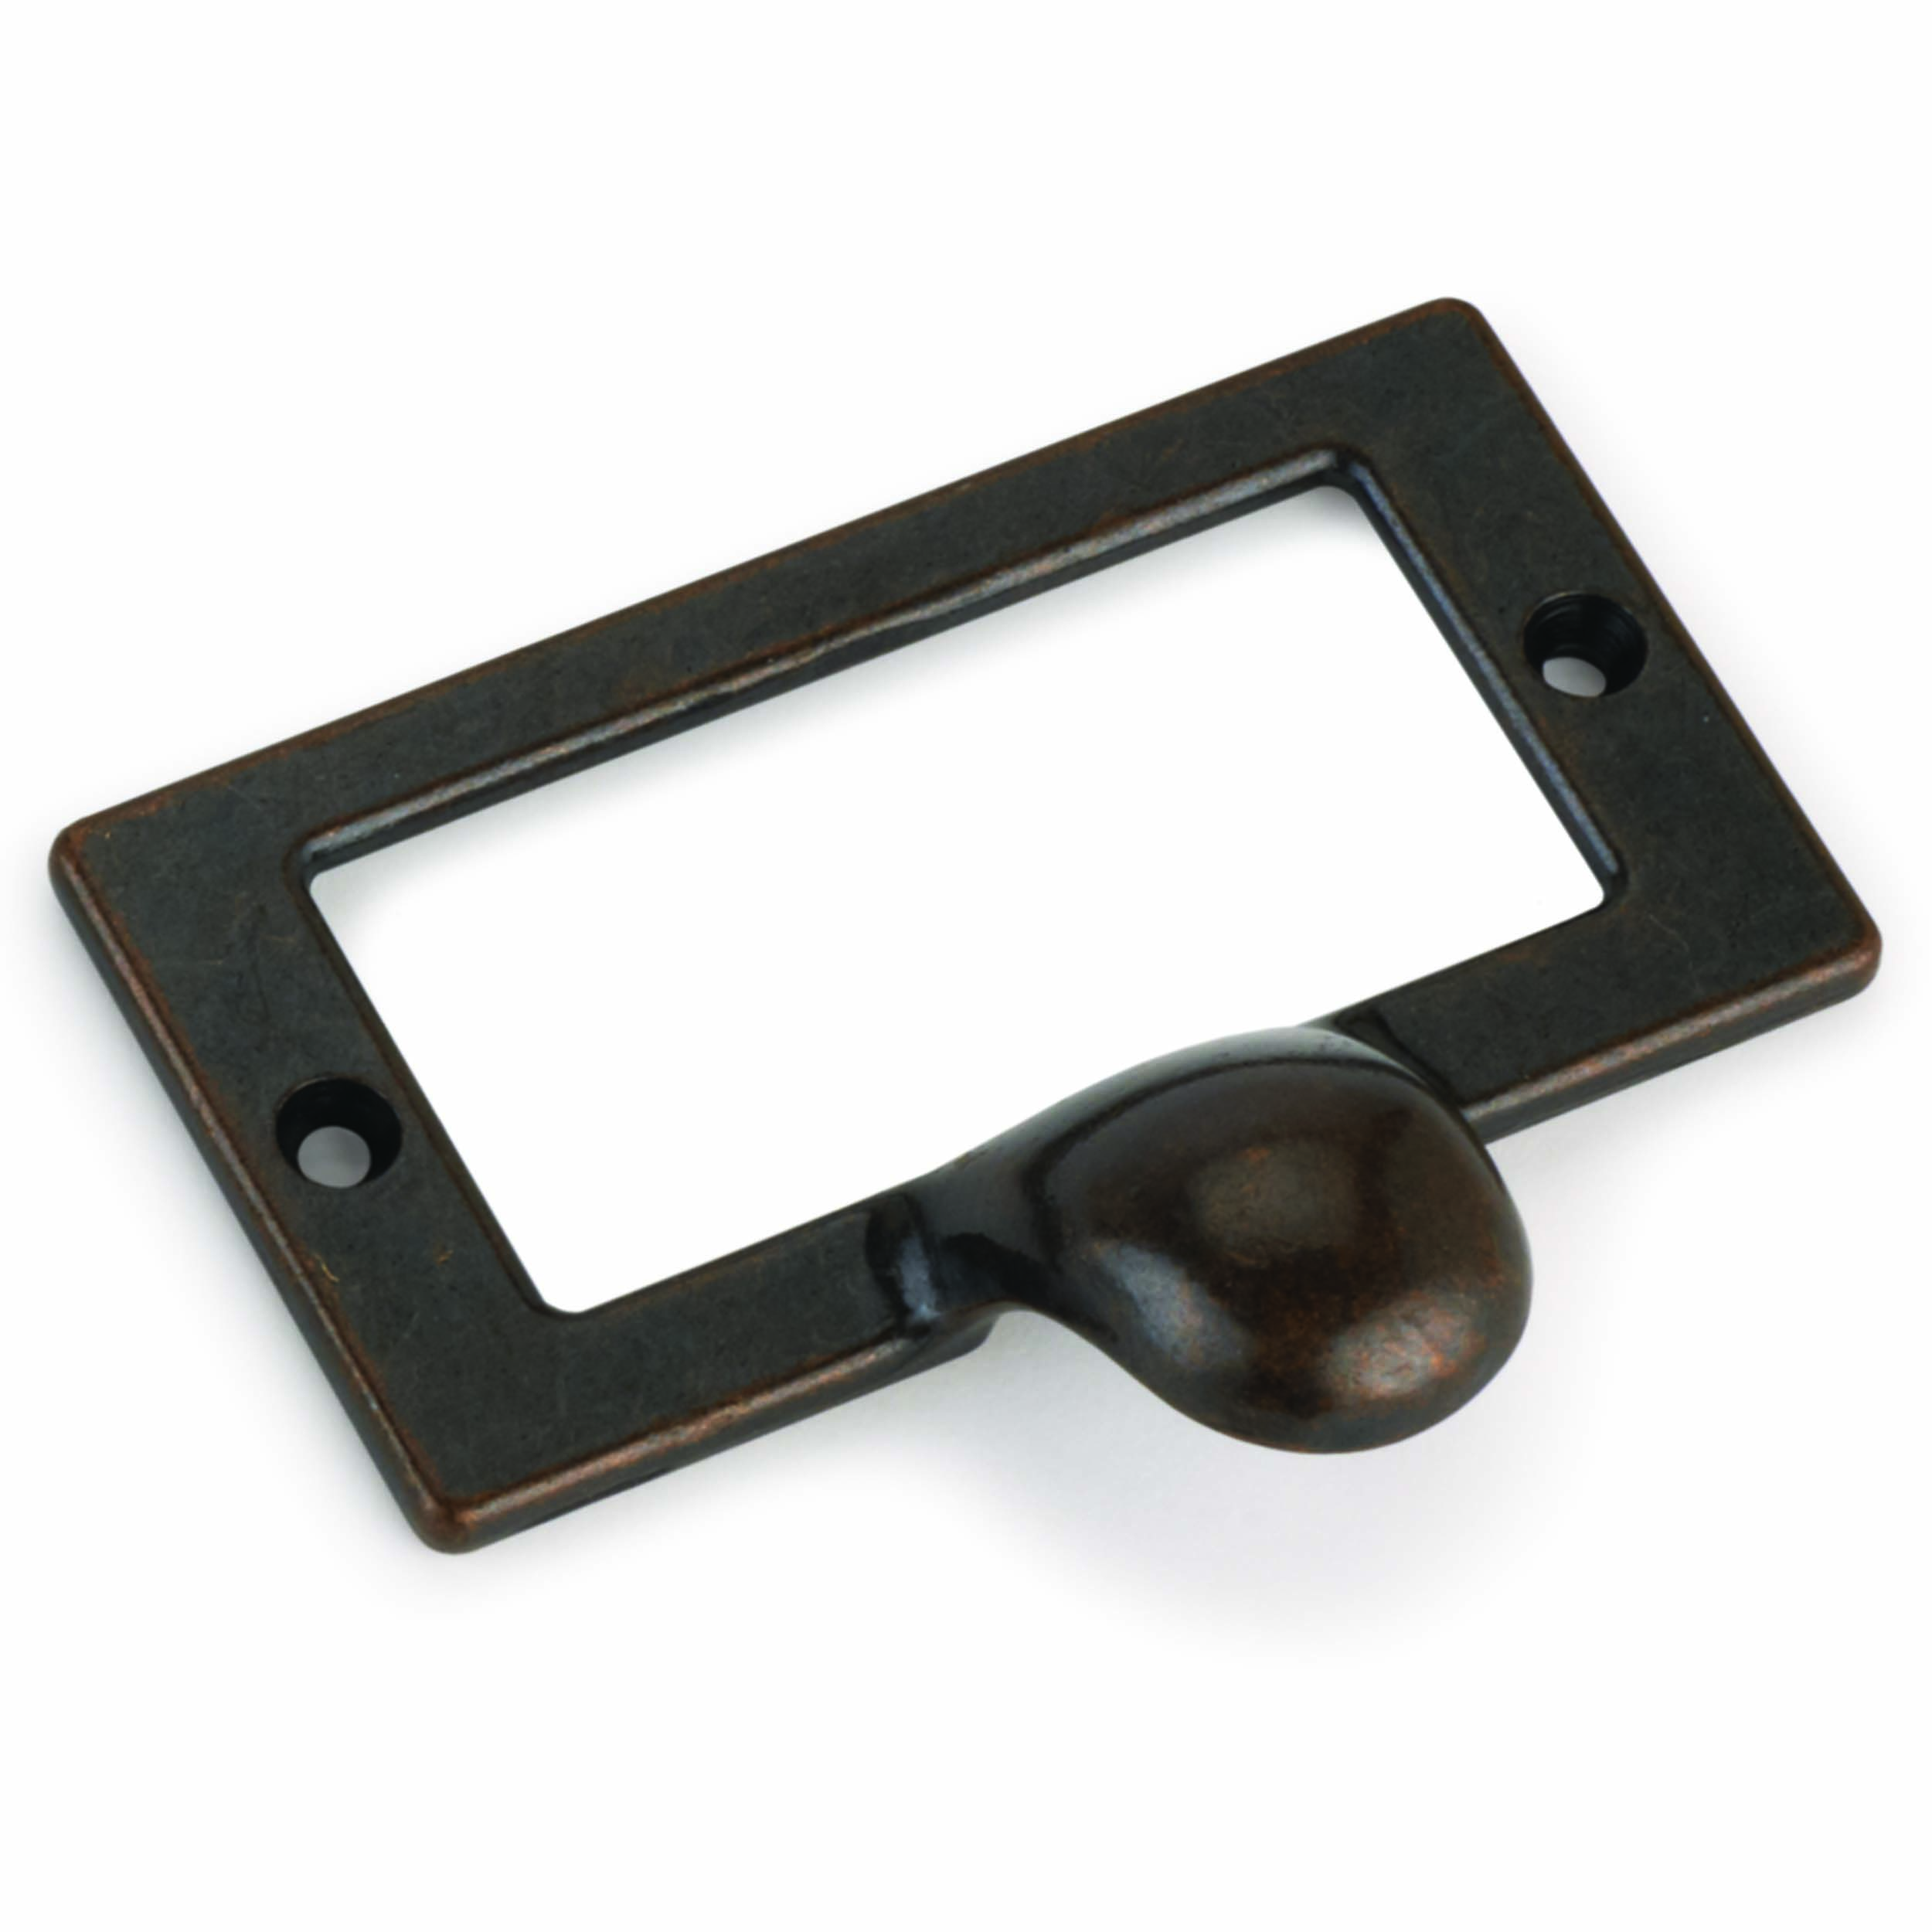 Drawer Pull With Card Holder, Dark Copper Finish